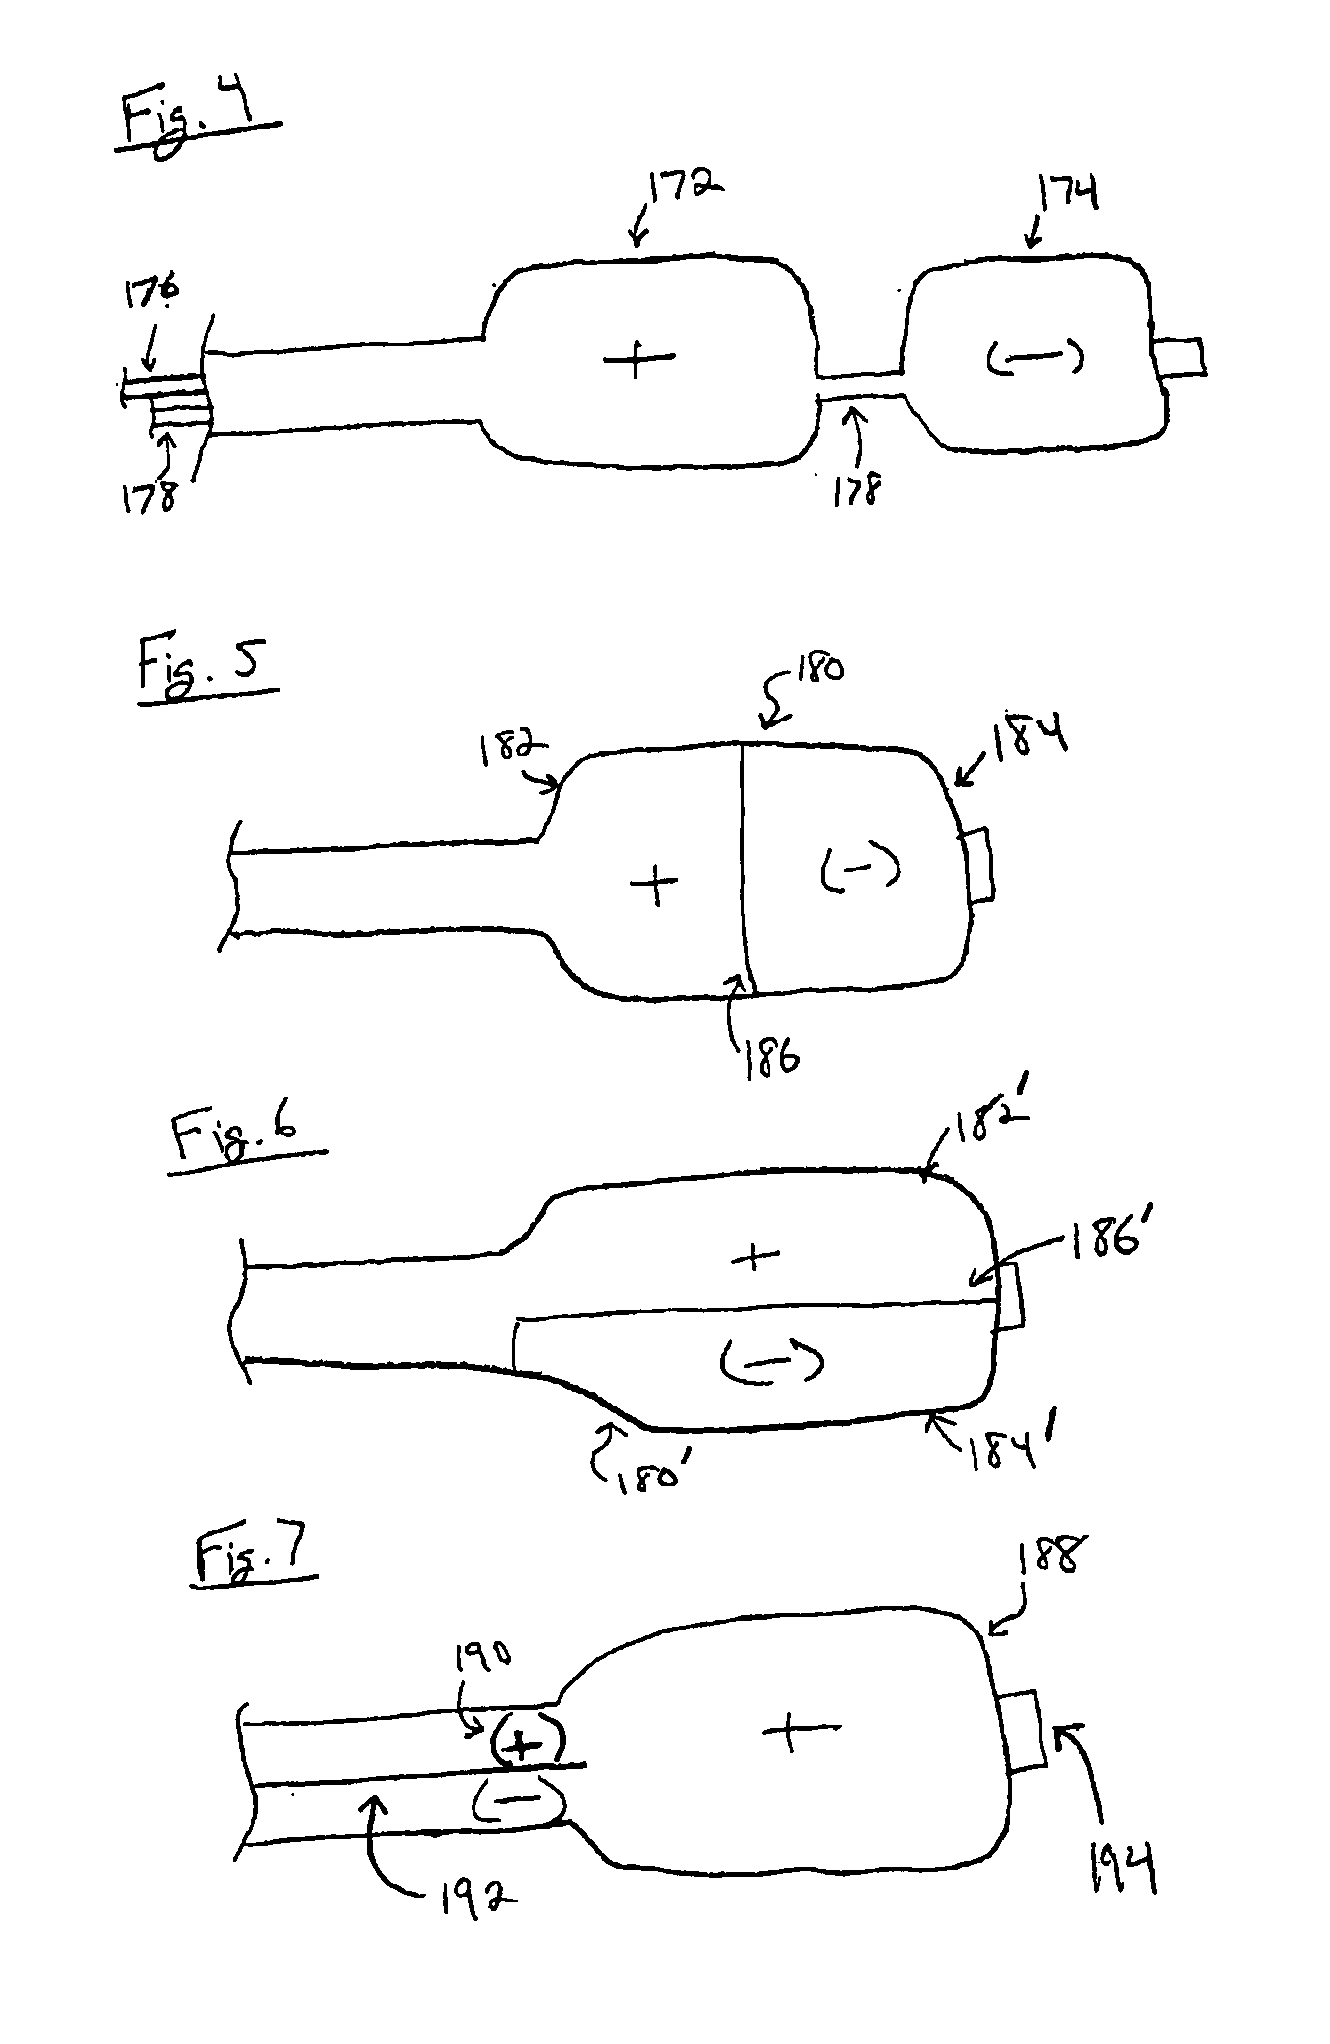 Apparatus and method for ablation of targeted tissue